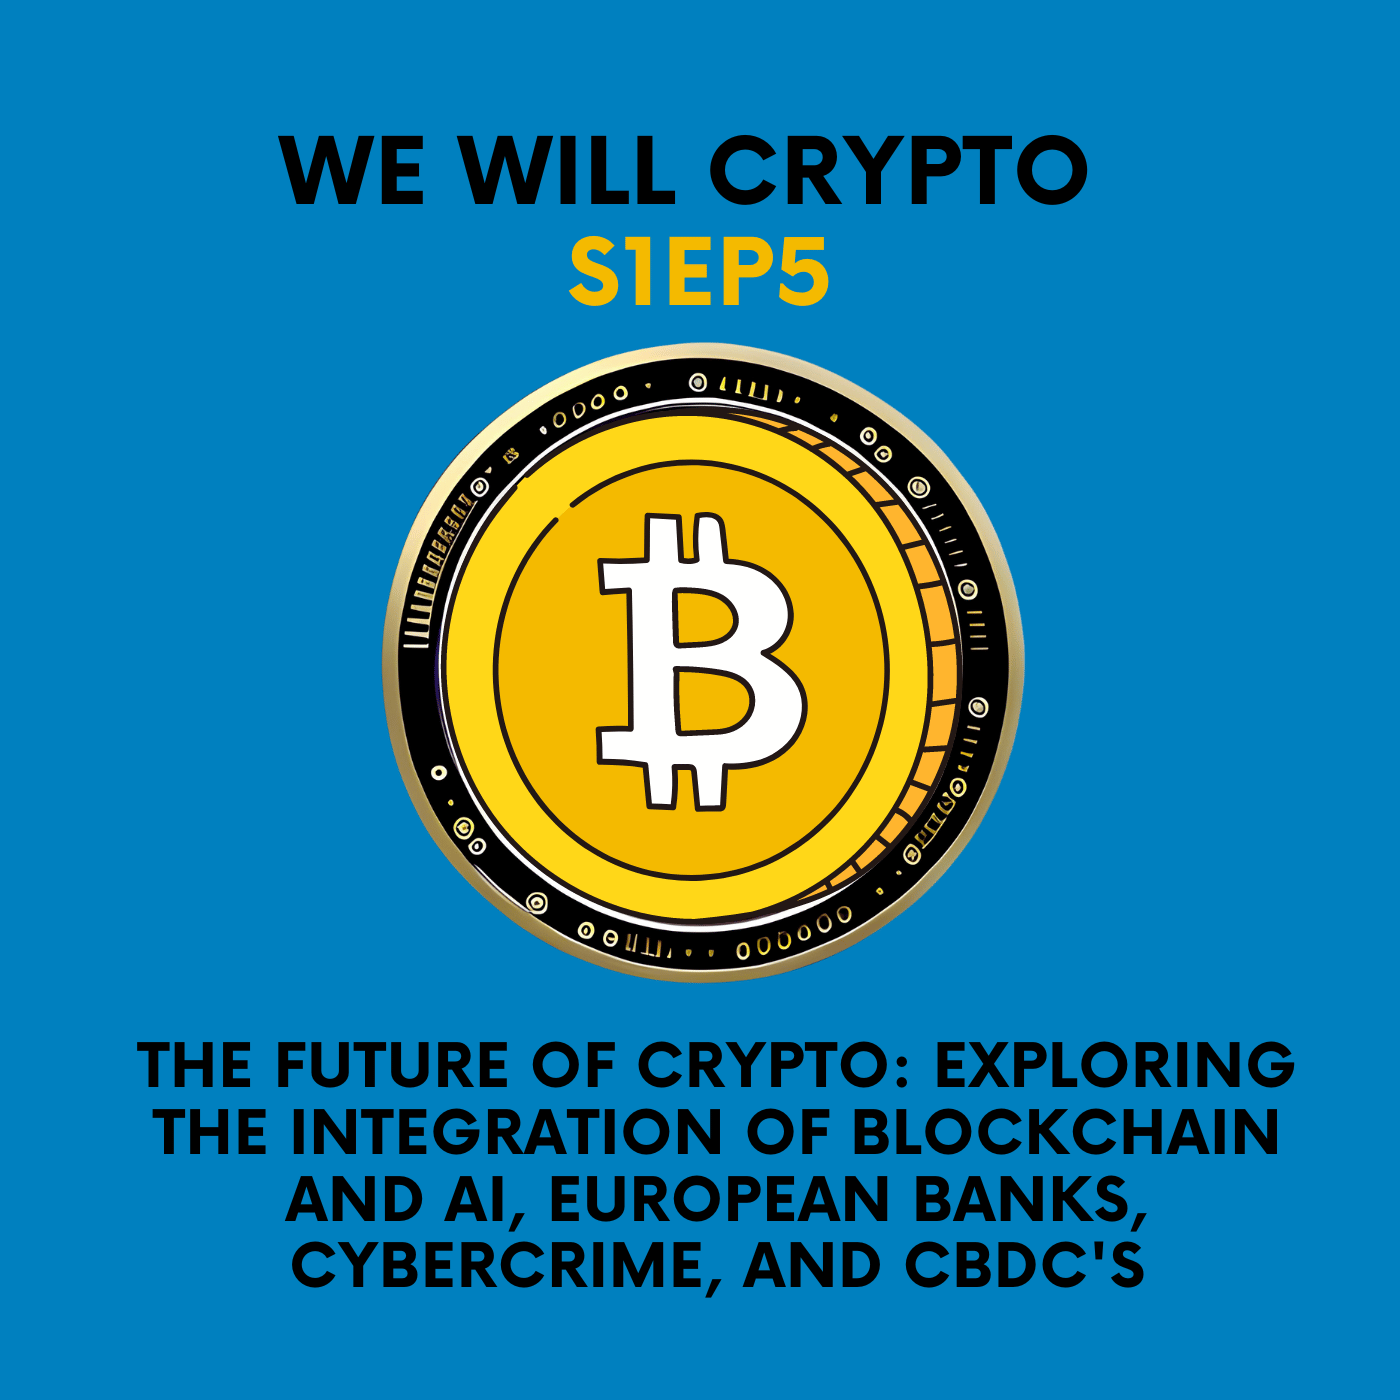 The Future of Crypto: Exploring the Integration of Blockchain and AI, European Banks, Cybercrime, and CBDC's